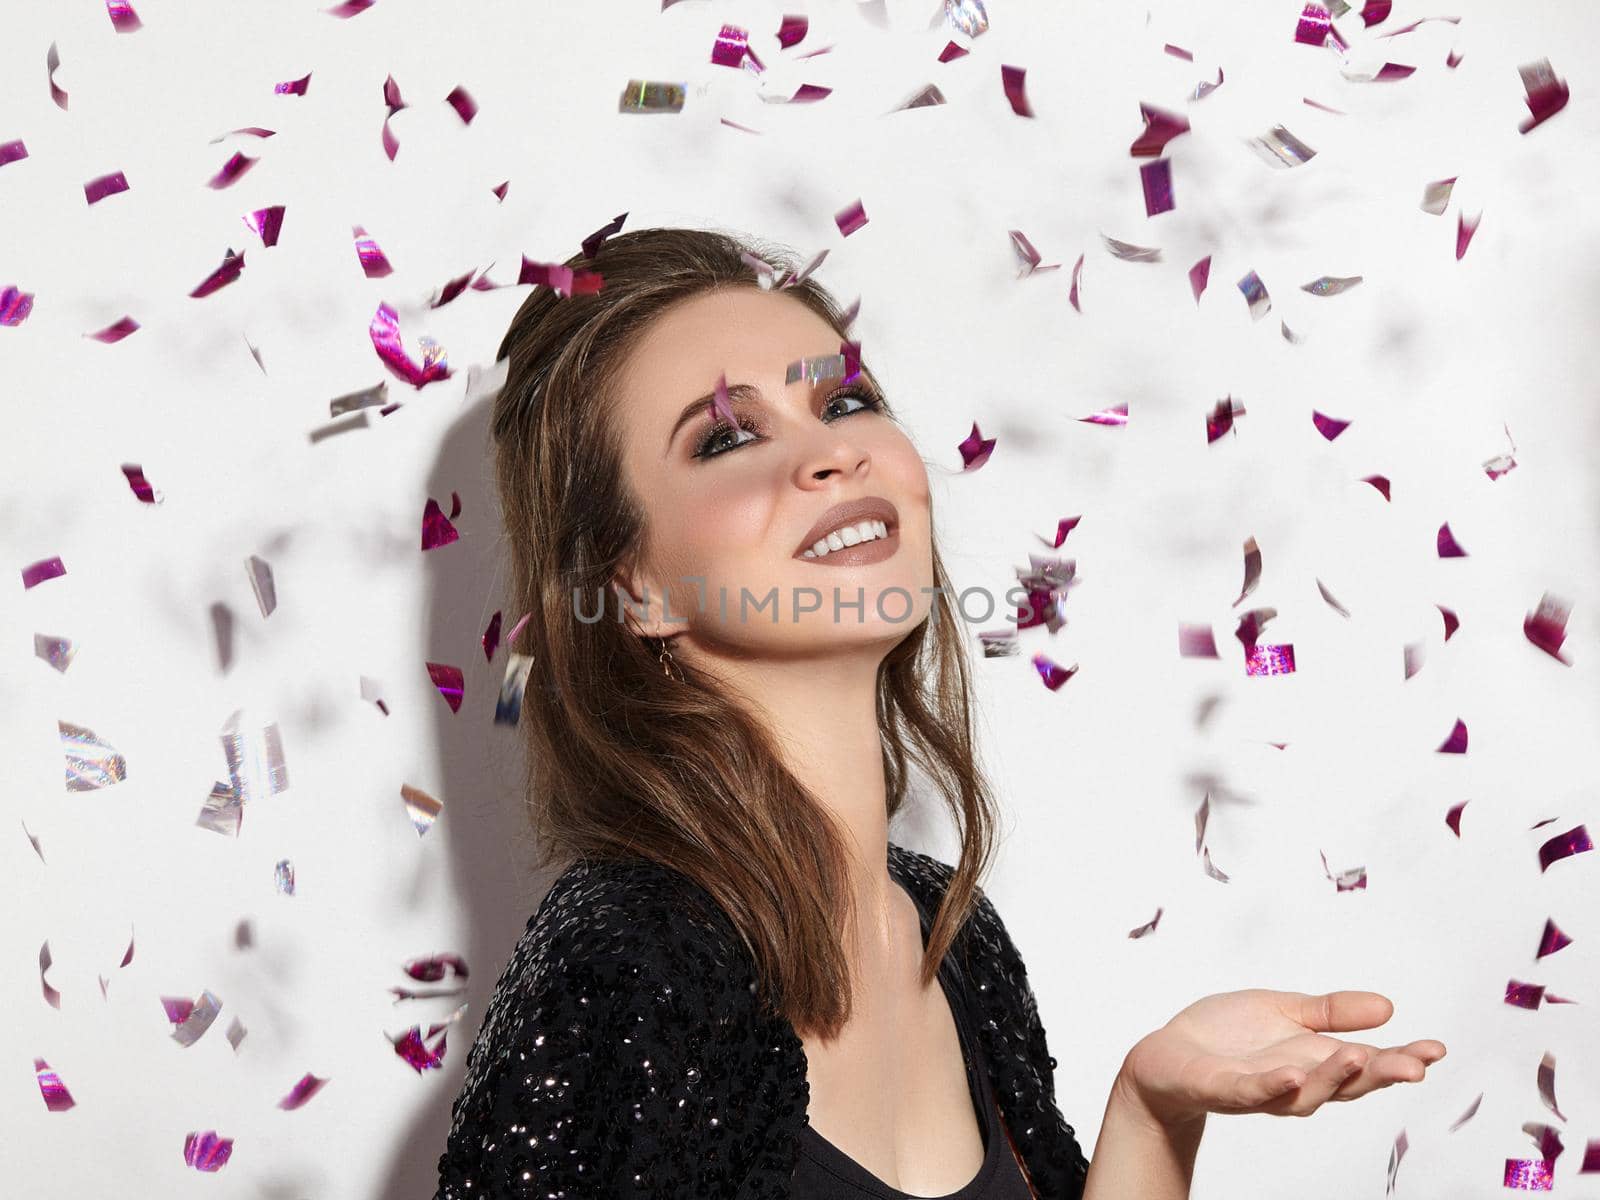 Party Time. Beautiful Happy Woman Smiling. Christmas Style in Confetti. Shiny Celebrate Look with Bright Fashion Make-up. Sexy Evening Makeup